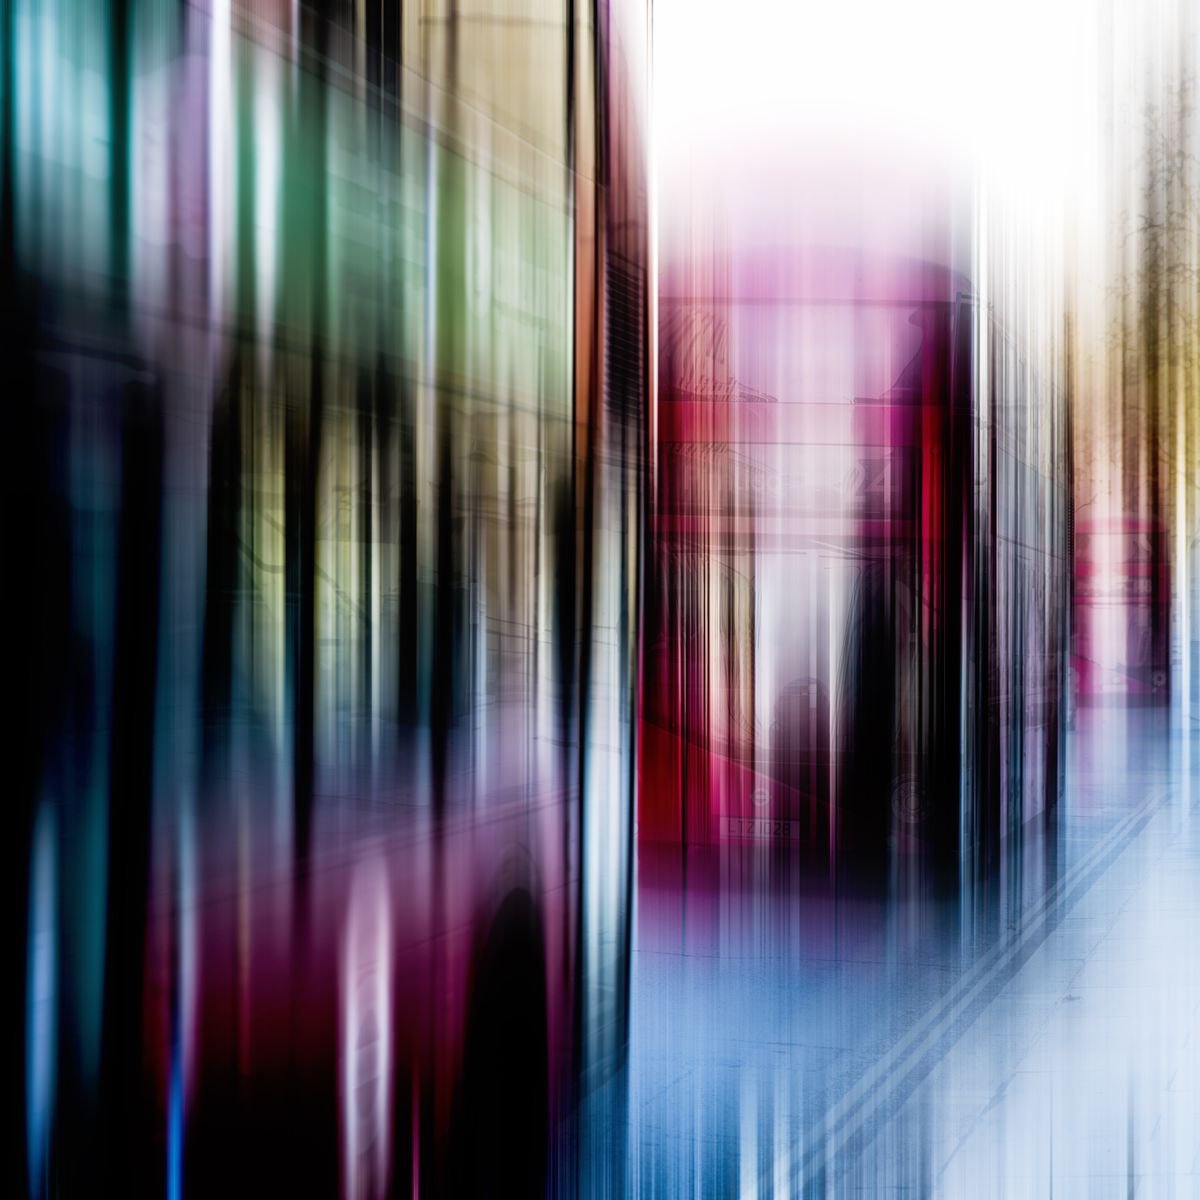 Abstract London: Buses by Graham Briggs